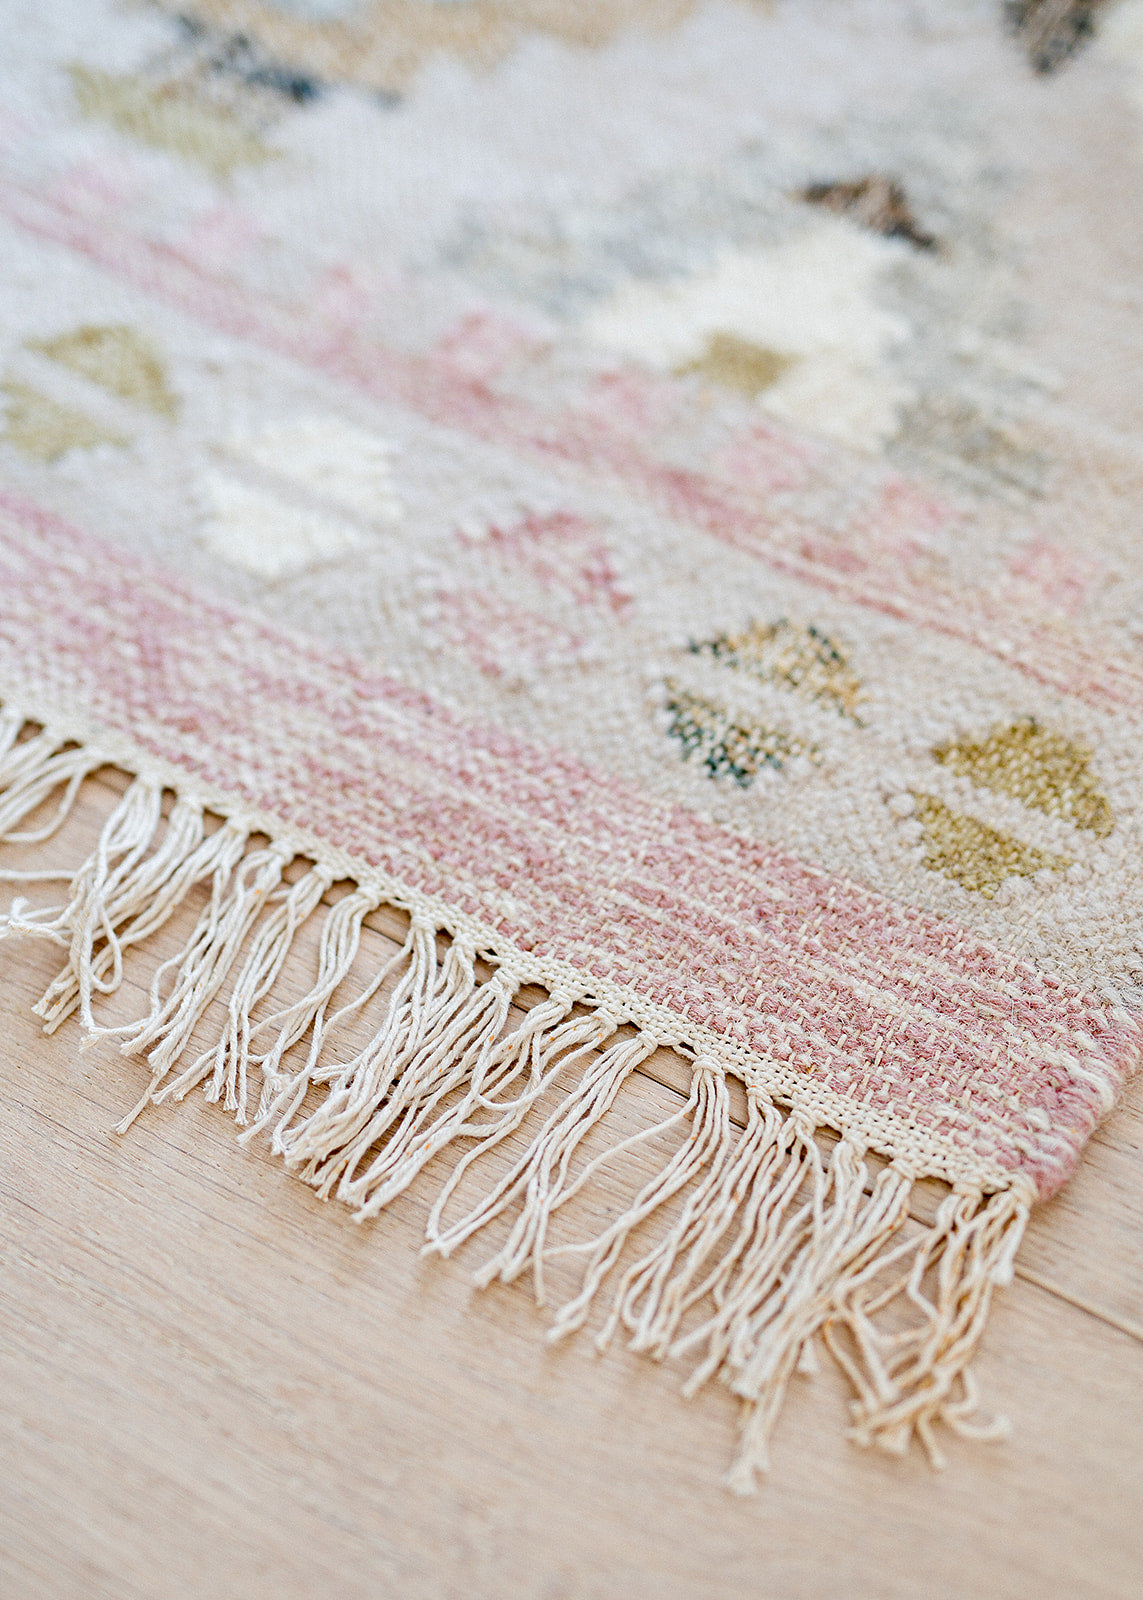 Shop our collection of woven rugs at Curio Collective for added texture in your space.